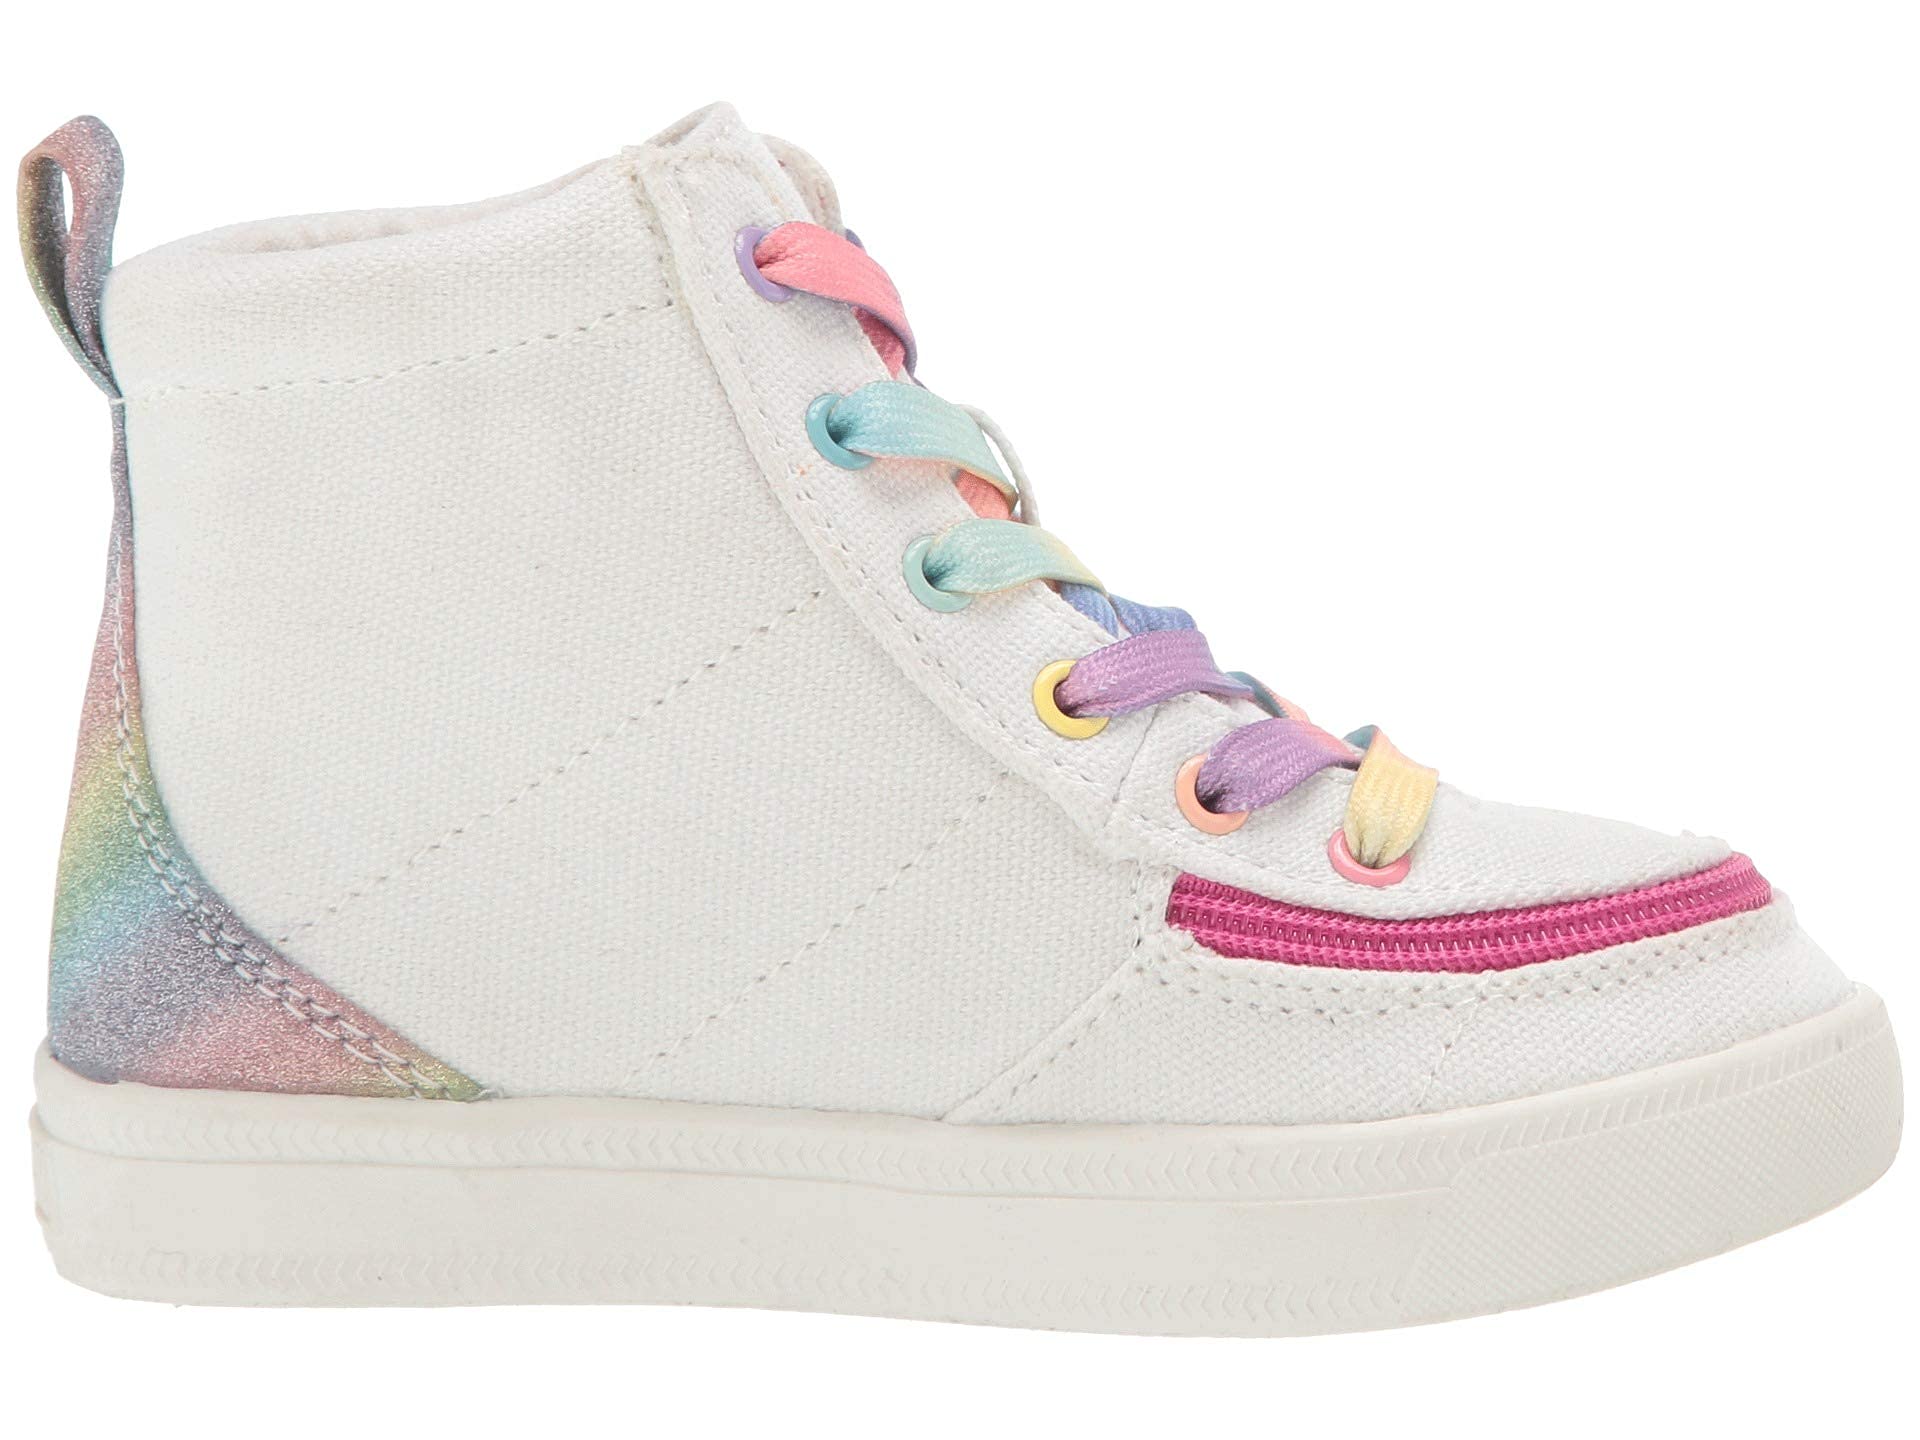 BILLY Footwear Kids Baby Girl's Classic Lace High (Toddler) White Rainbow 10 Toddler M